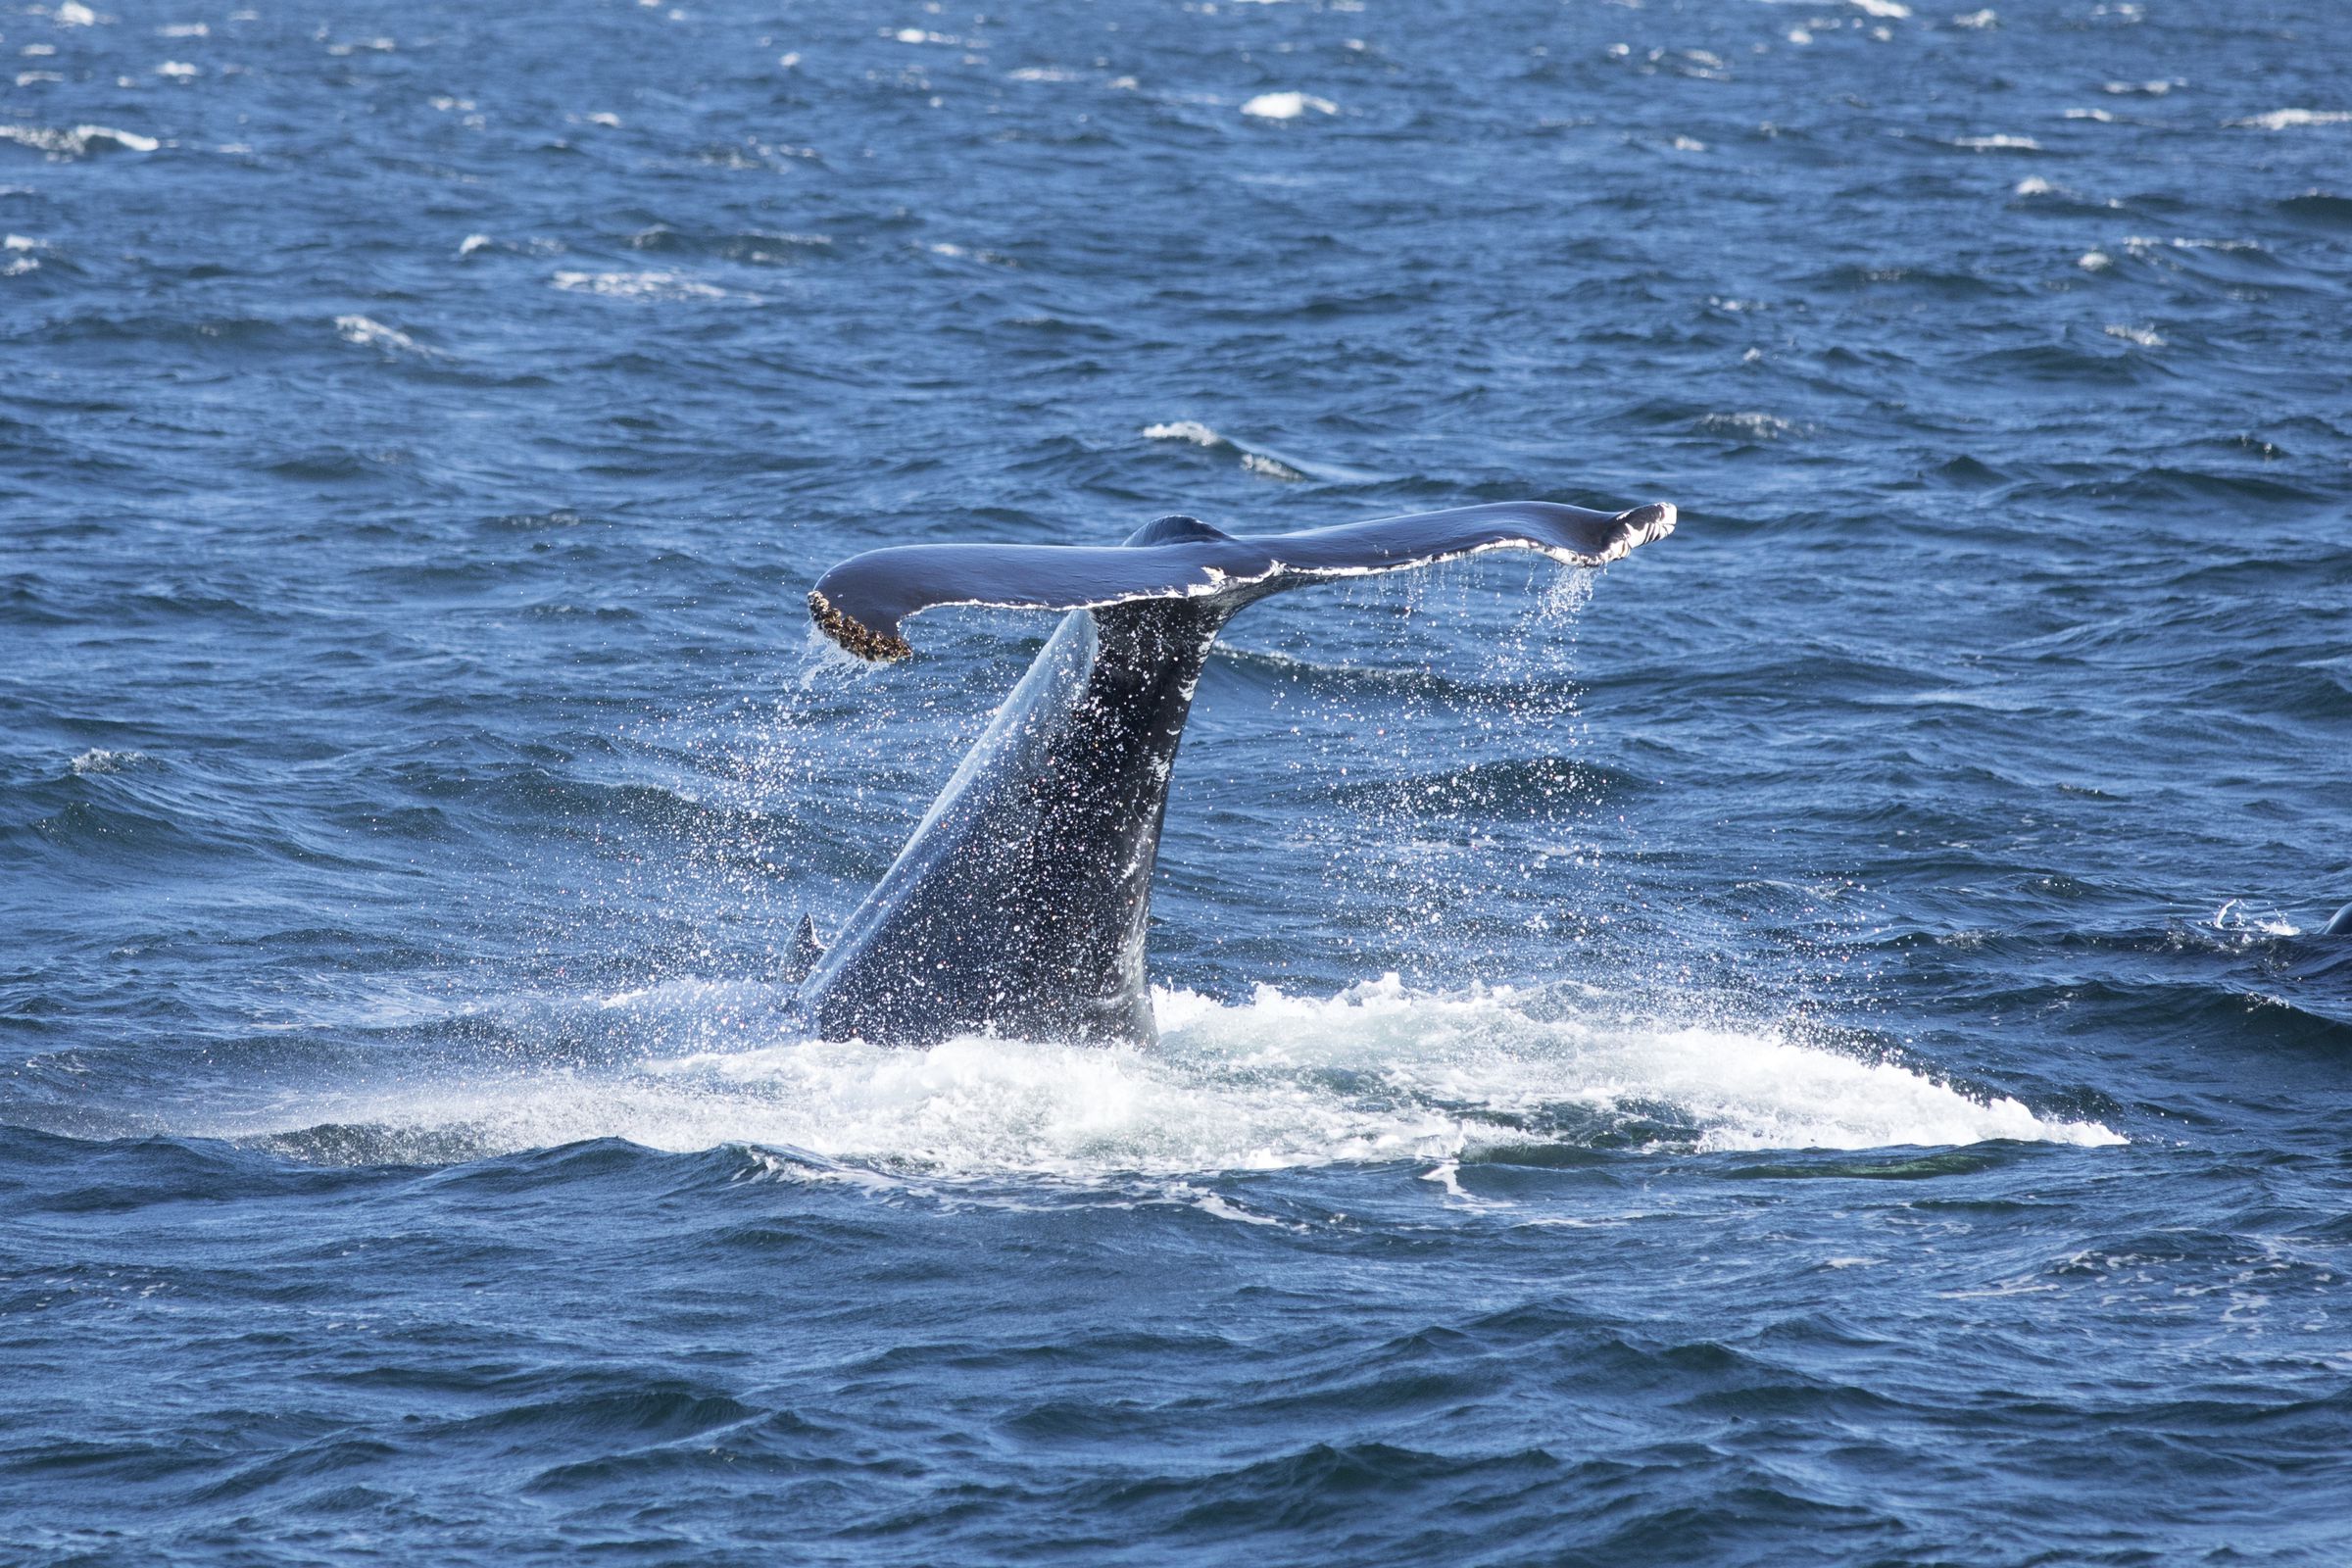 A humpback whale tail in the Atlantic Ocean.